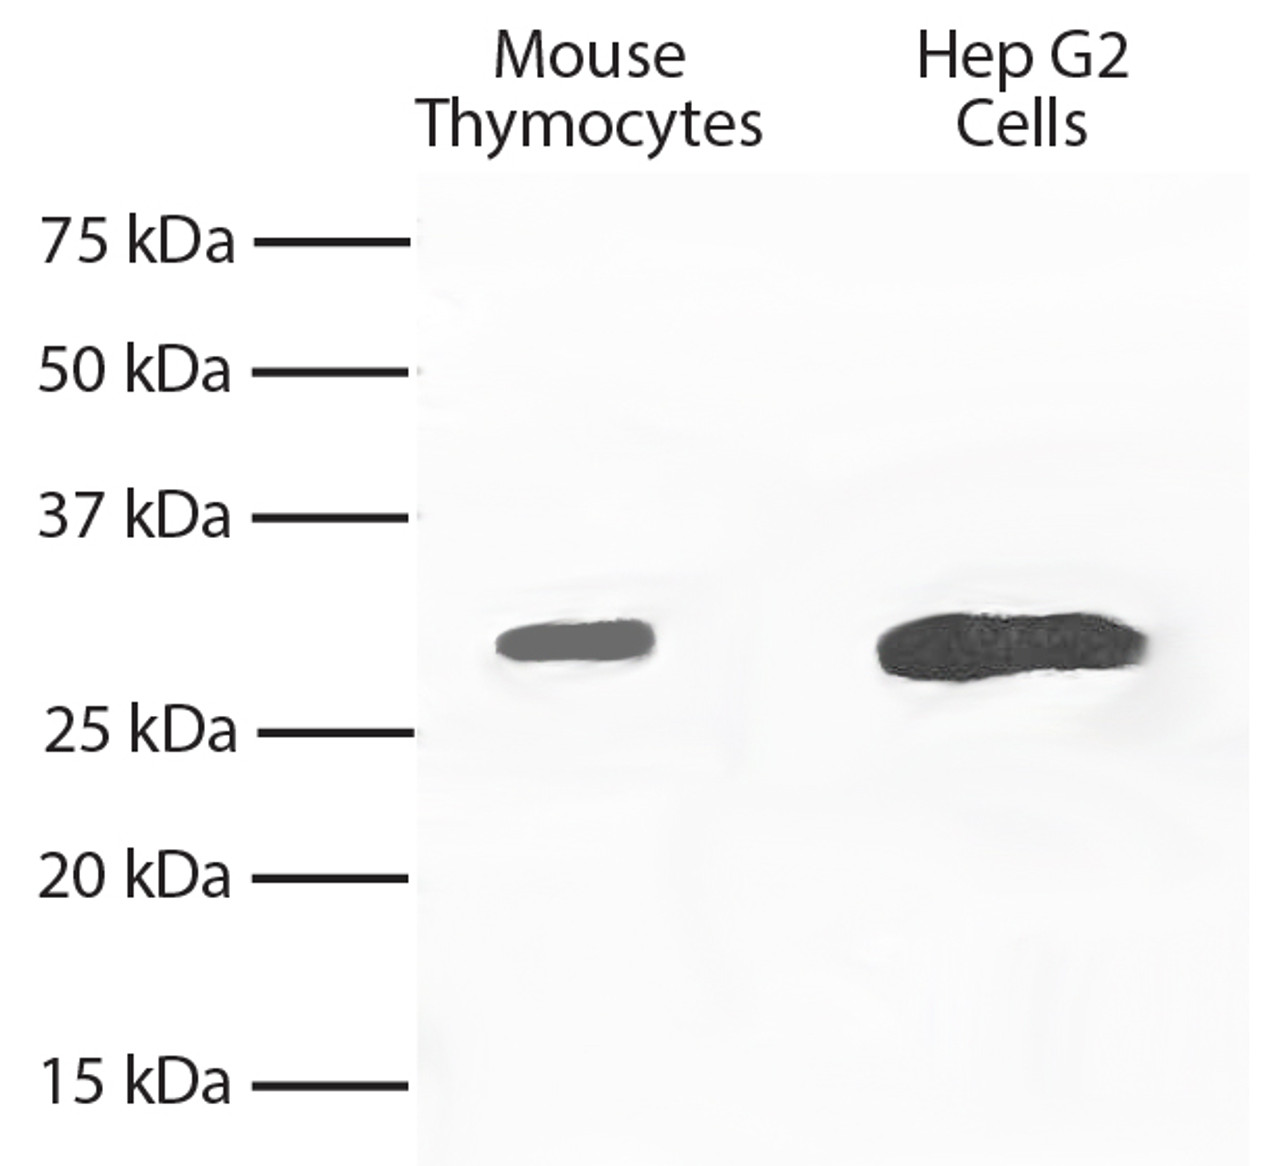 Total cell lysates from mouse thymocytes and Hep G2 cells were resolved by electrophoresis, transferred to PVDF membrane, and probed with Mouse Anti-Bcl-xL-UNLB (Cat. No. 99-620) . Proteins were visualized using Goat Anti-Mouse IgG2a, Human ads-HRP secondary antibody and chemiluminescent detection.